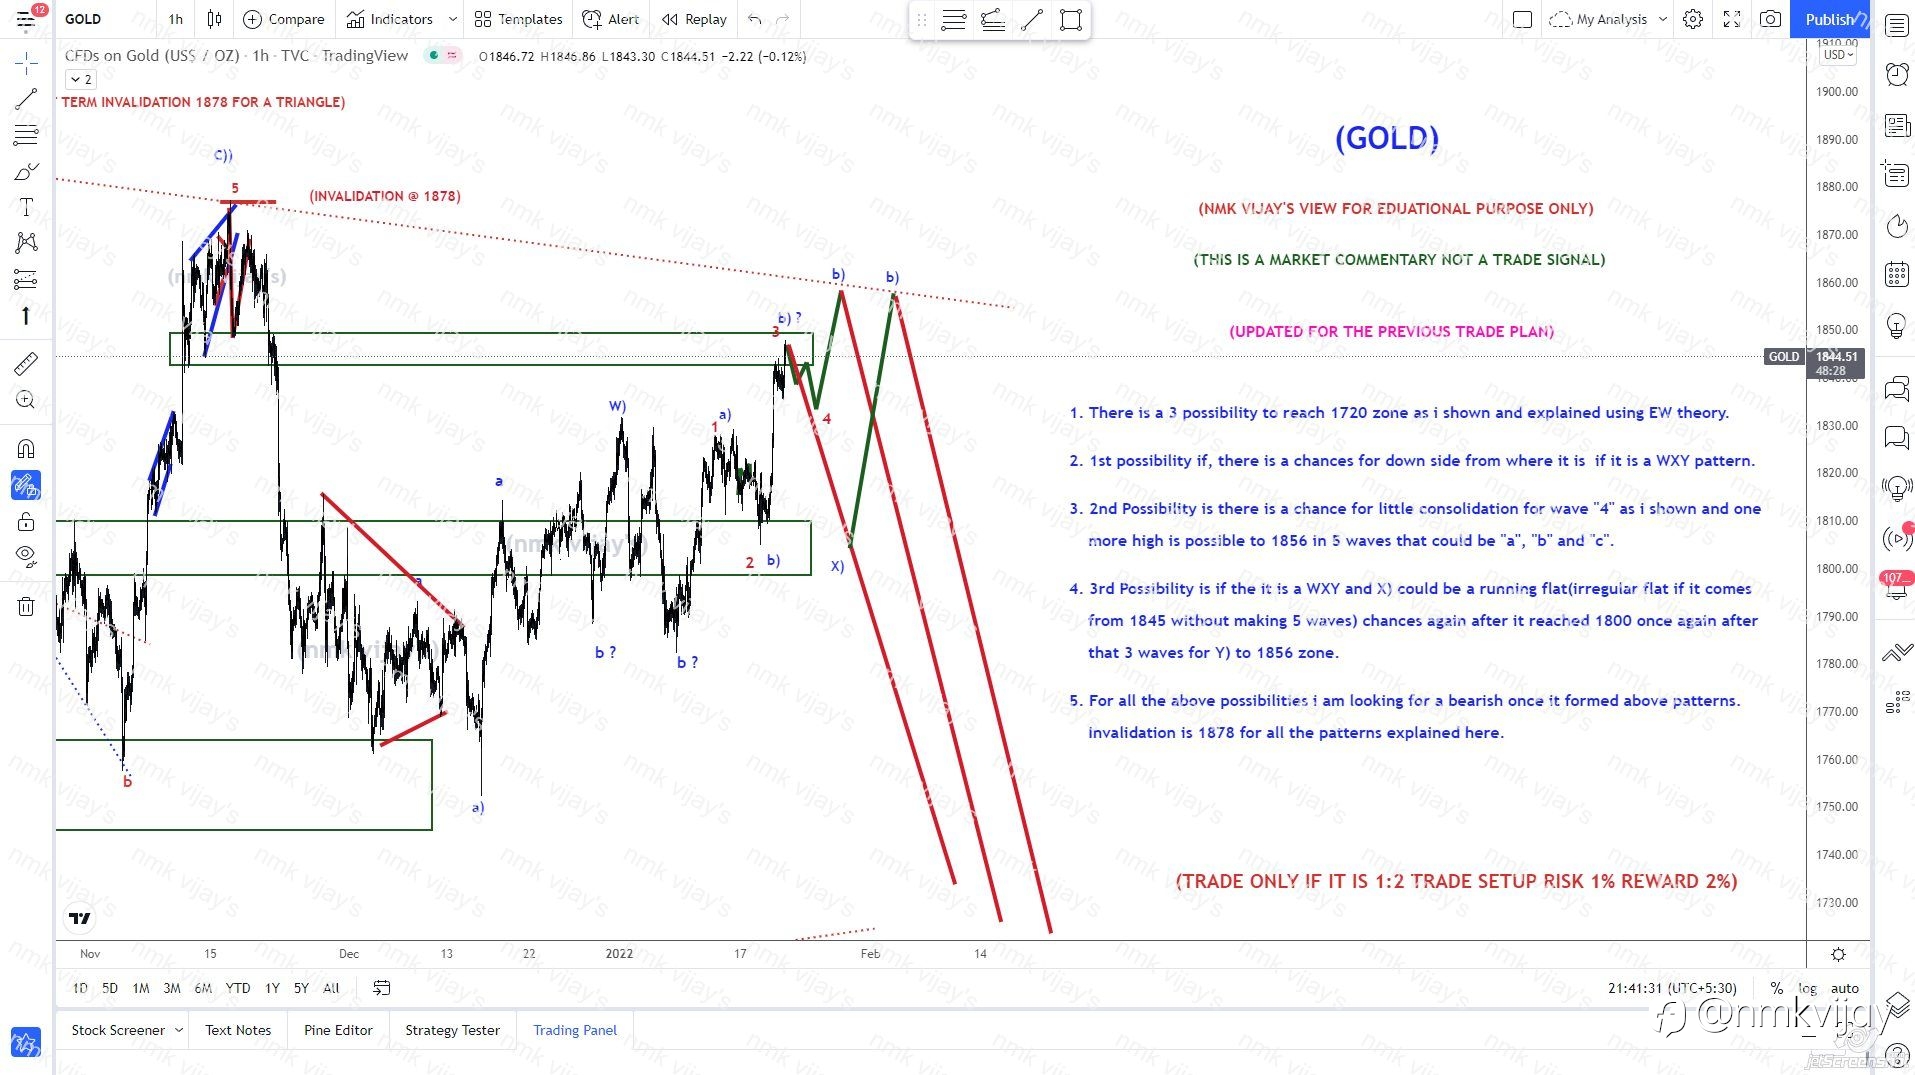 GOLD-3 Possibilities found and invalidation given for TP 1720